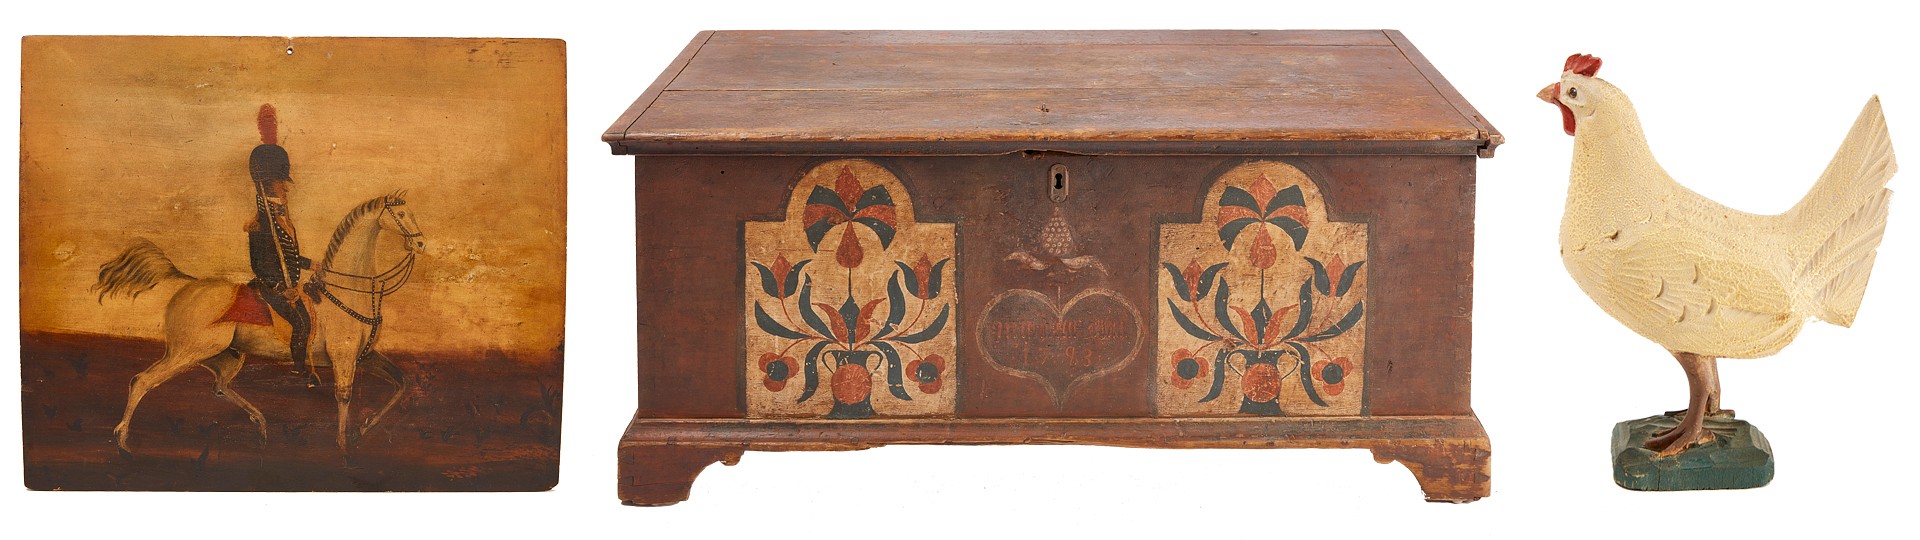 Americana from Estates & Collections by New Haven Auctions